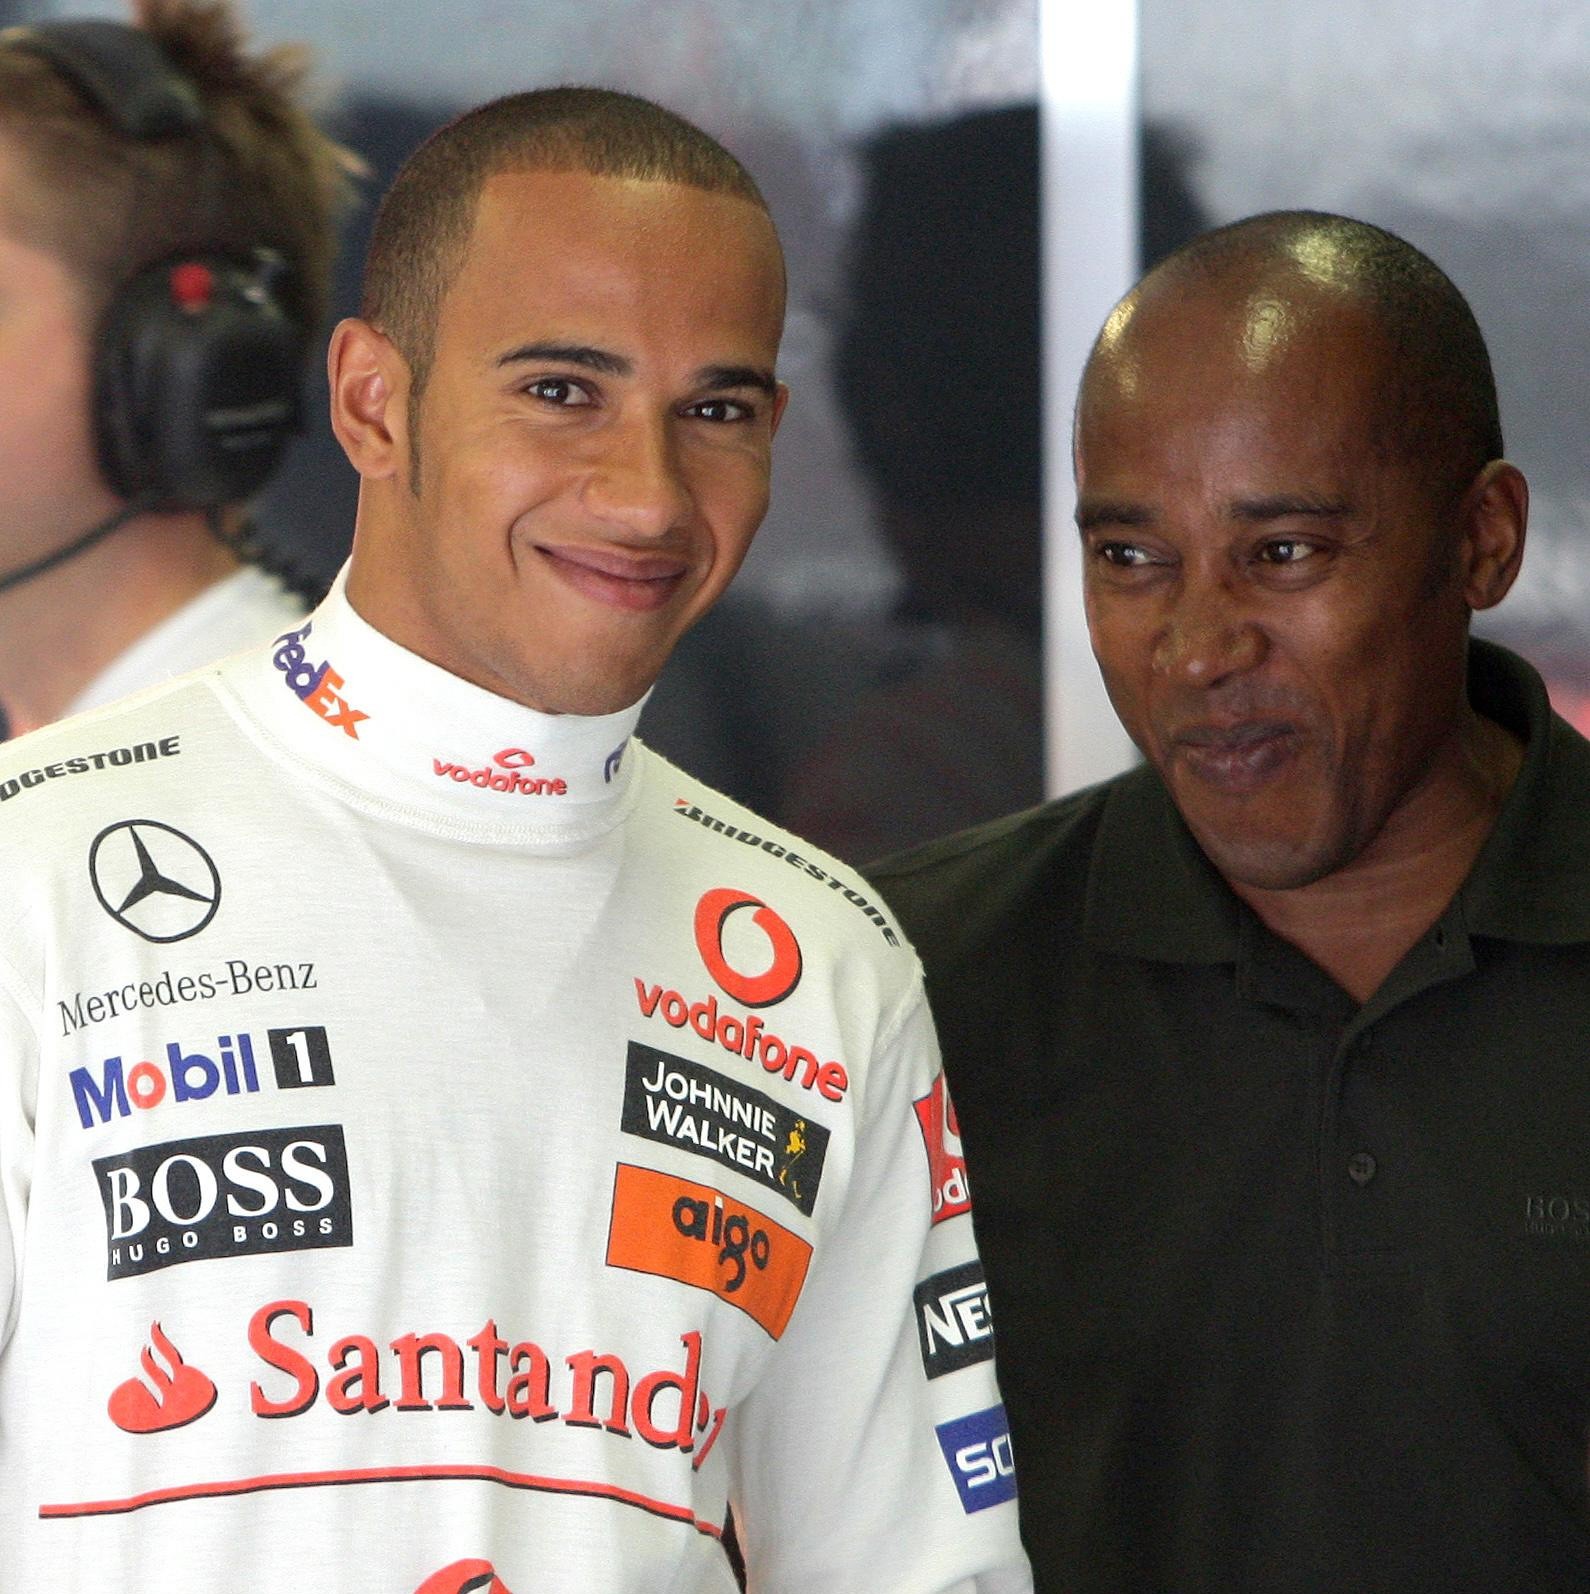 Lewis Hamilton In A Class Of His Own, Thanks To “Utterly Unblemished